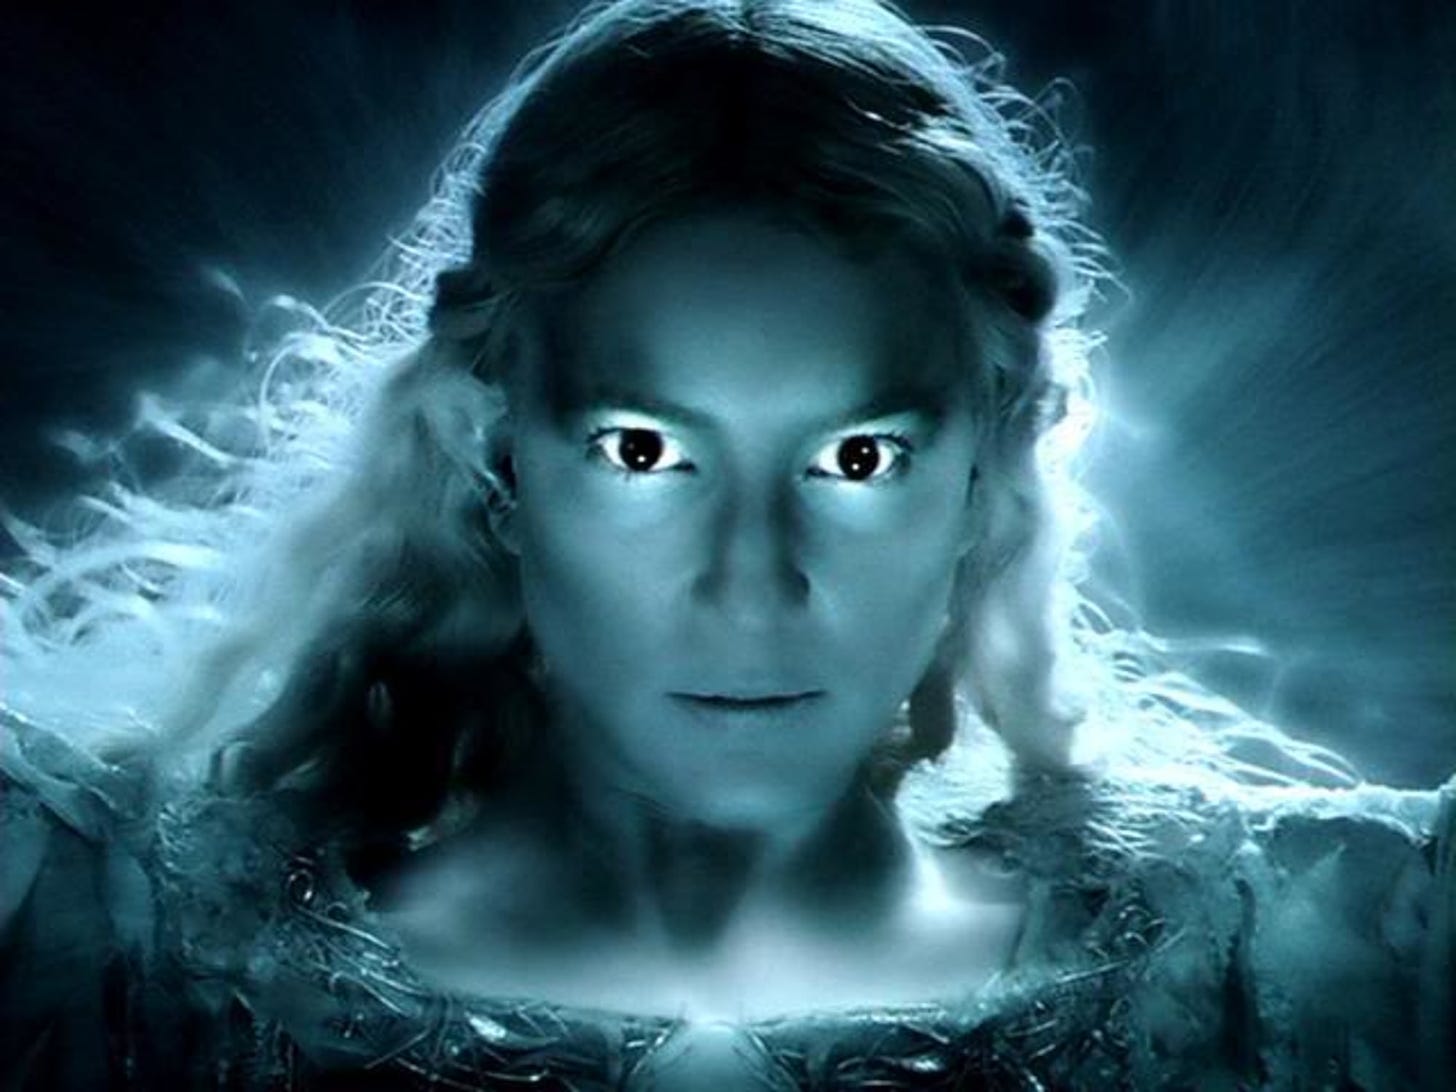 Amazon has cast Galadriel for its Lord of the Rings show